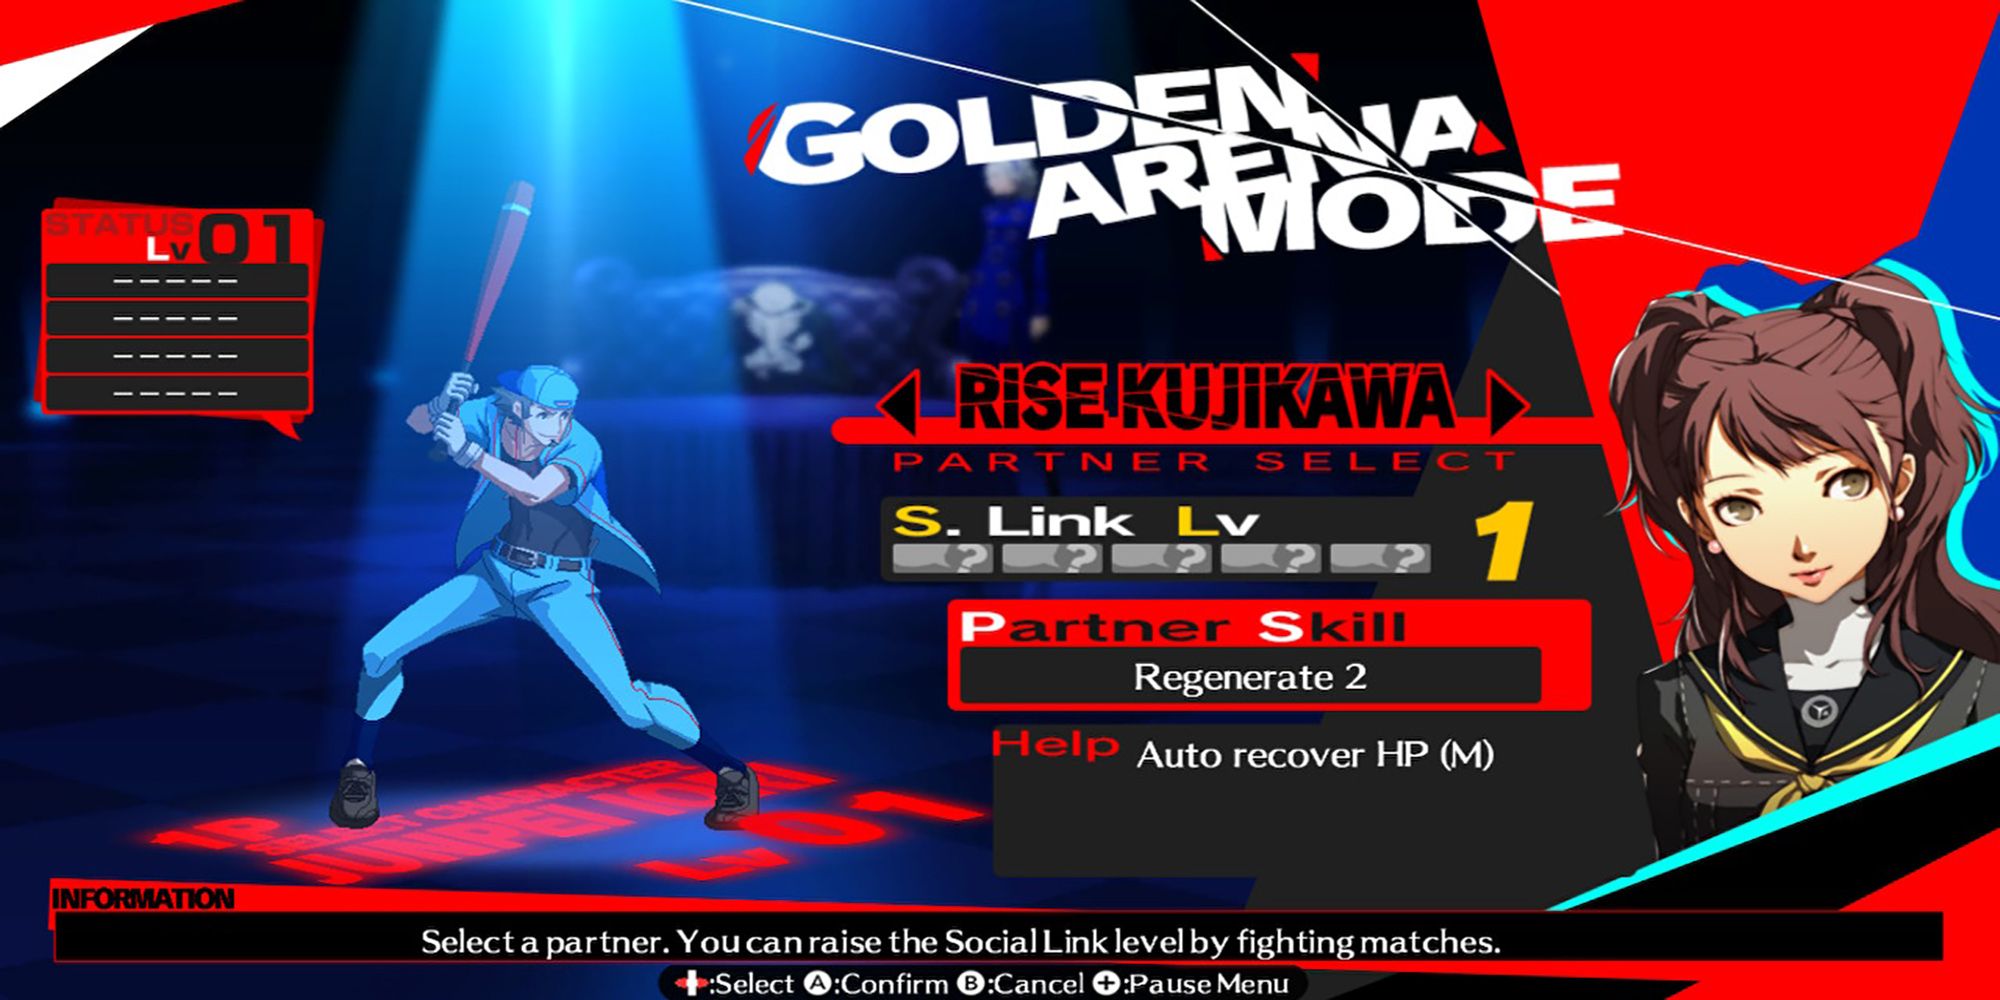 Rise Kujikawa is one of the various partners you can choose to assist you in Golden Arena Mode. Persona 4 Arena Ultimax.